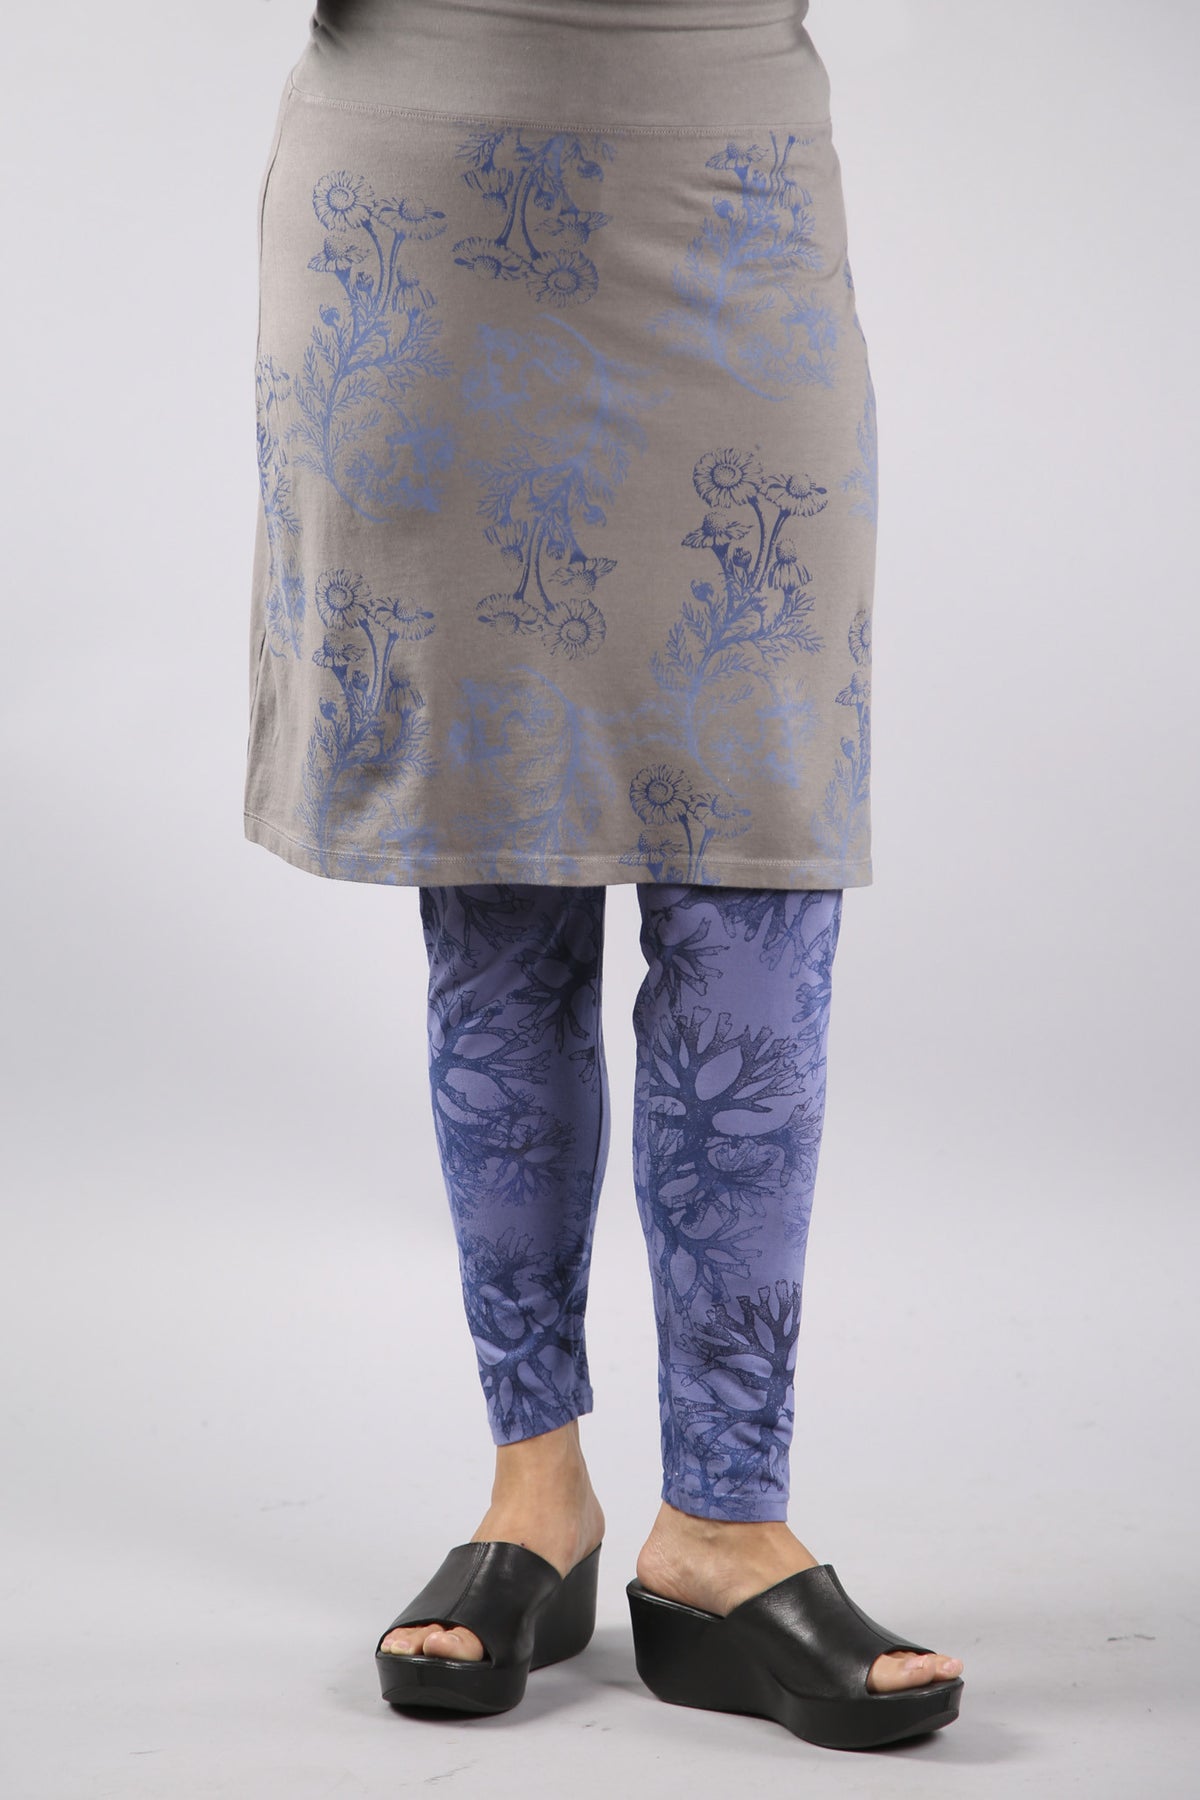 Layer Skirt Soot with floral blues 4169-P